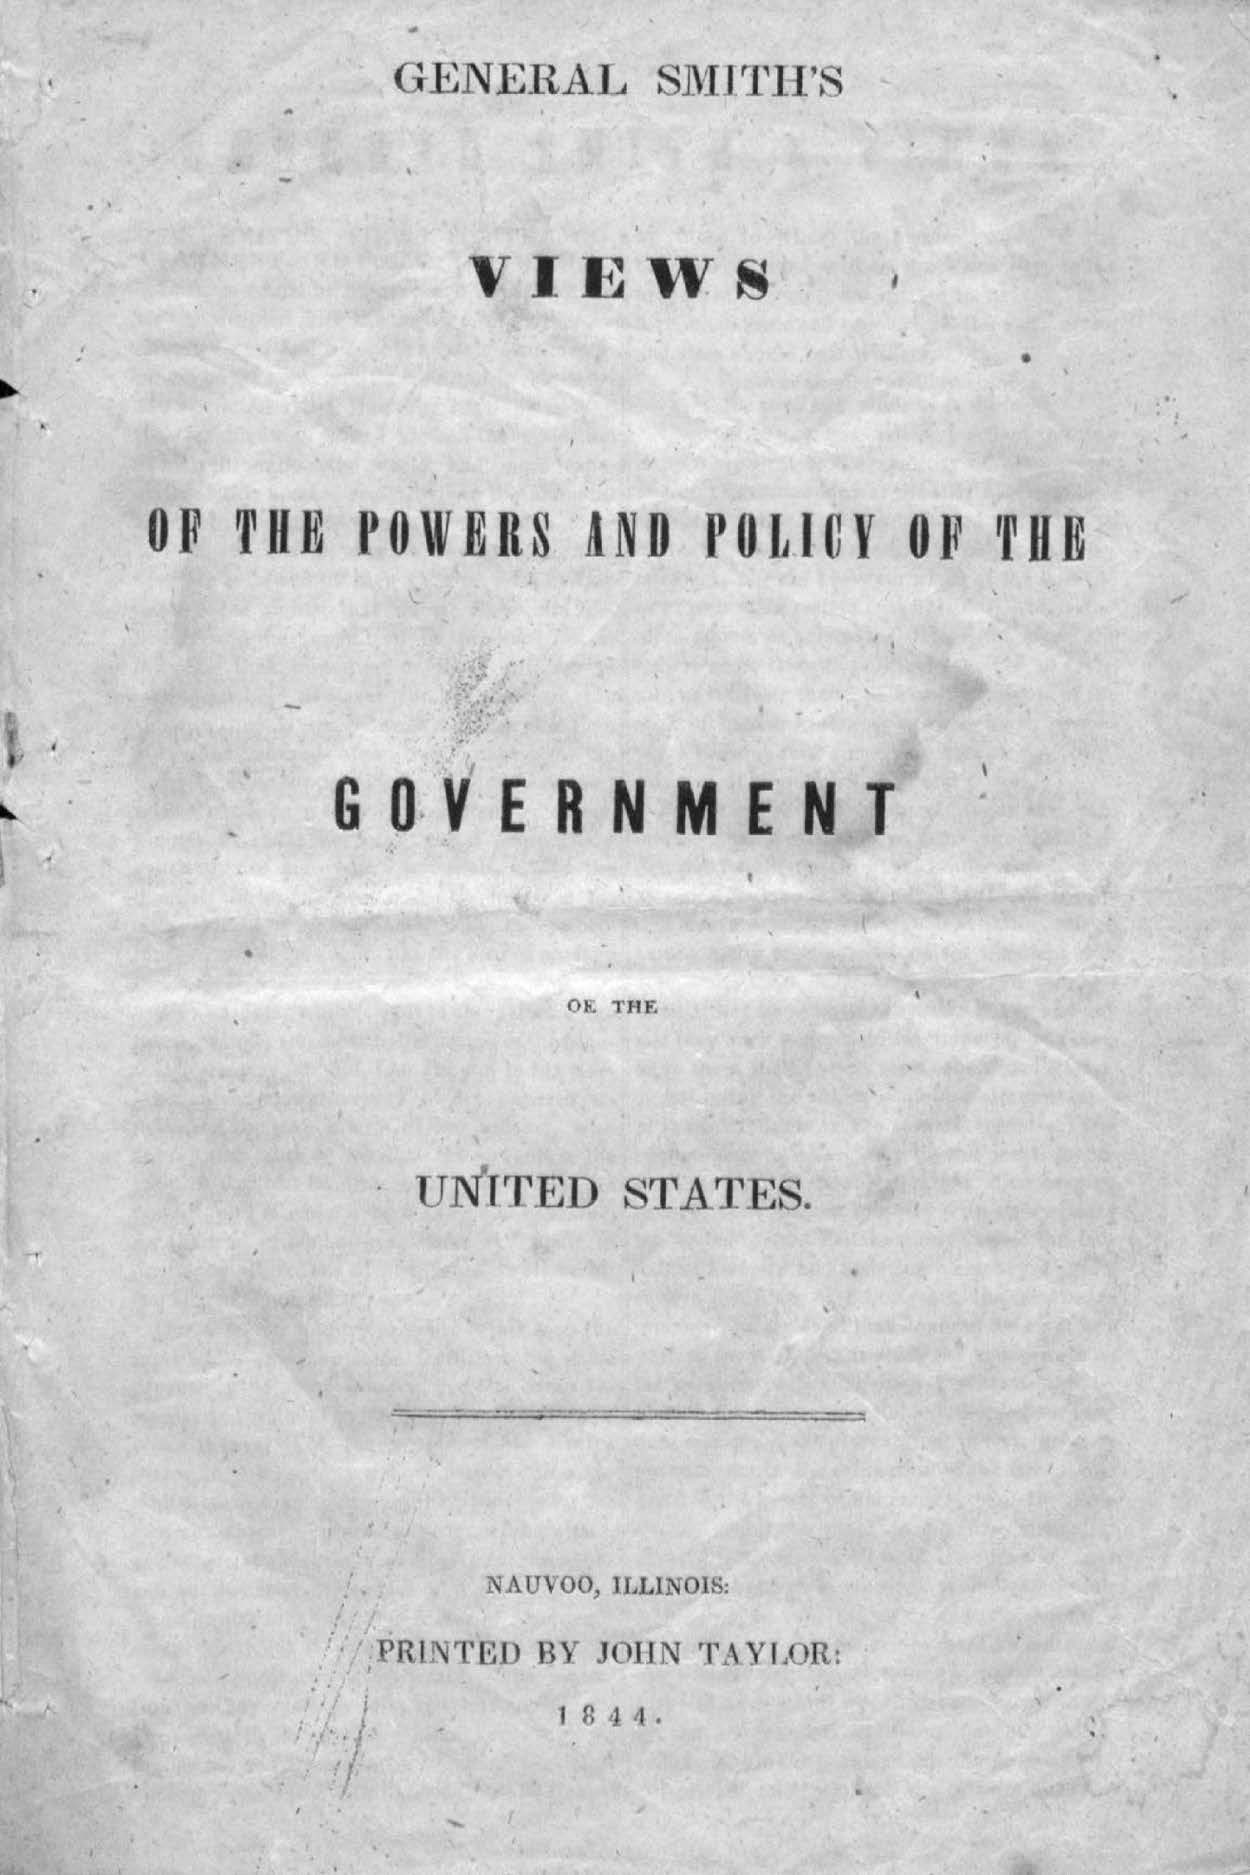 Joseph’s electioneers distributed copies of this pamphlet throughout the nation. Photo by author. Document courtesy of Church History Library.